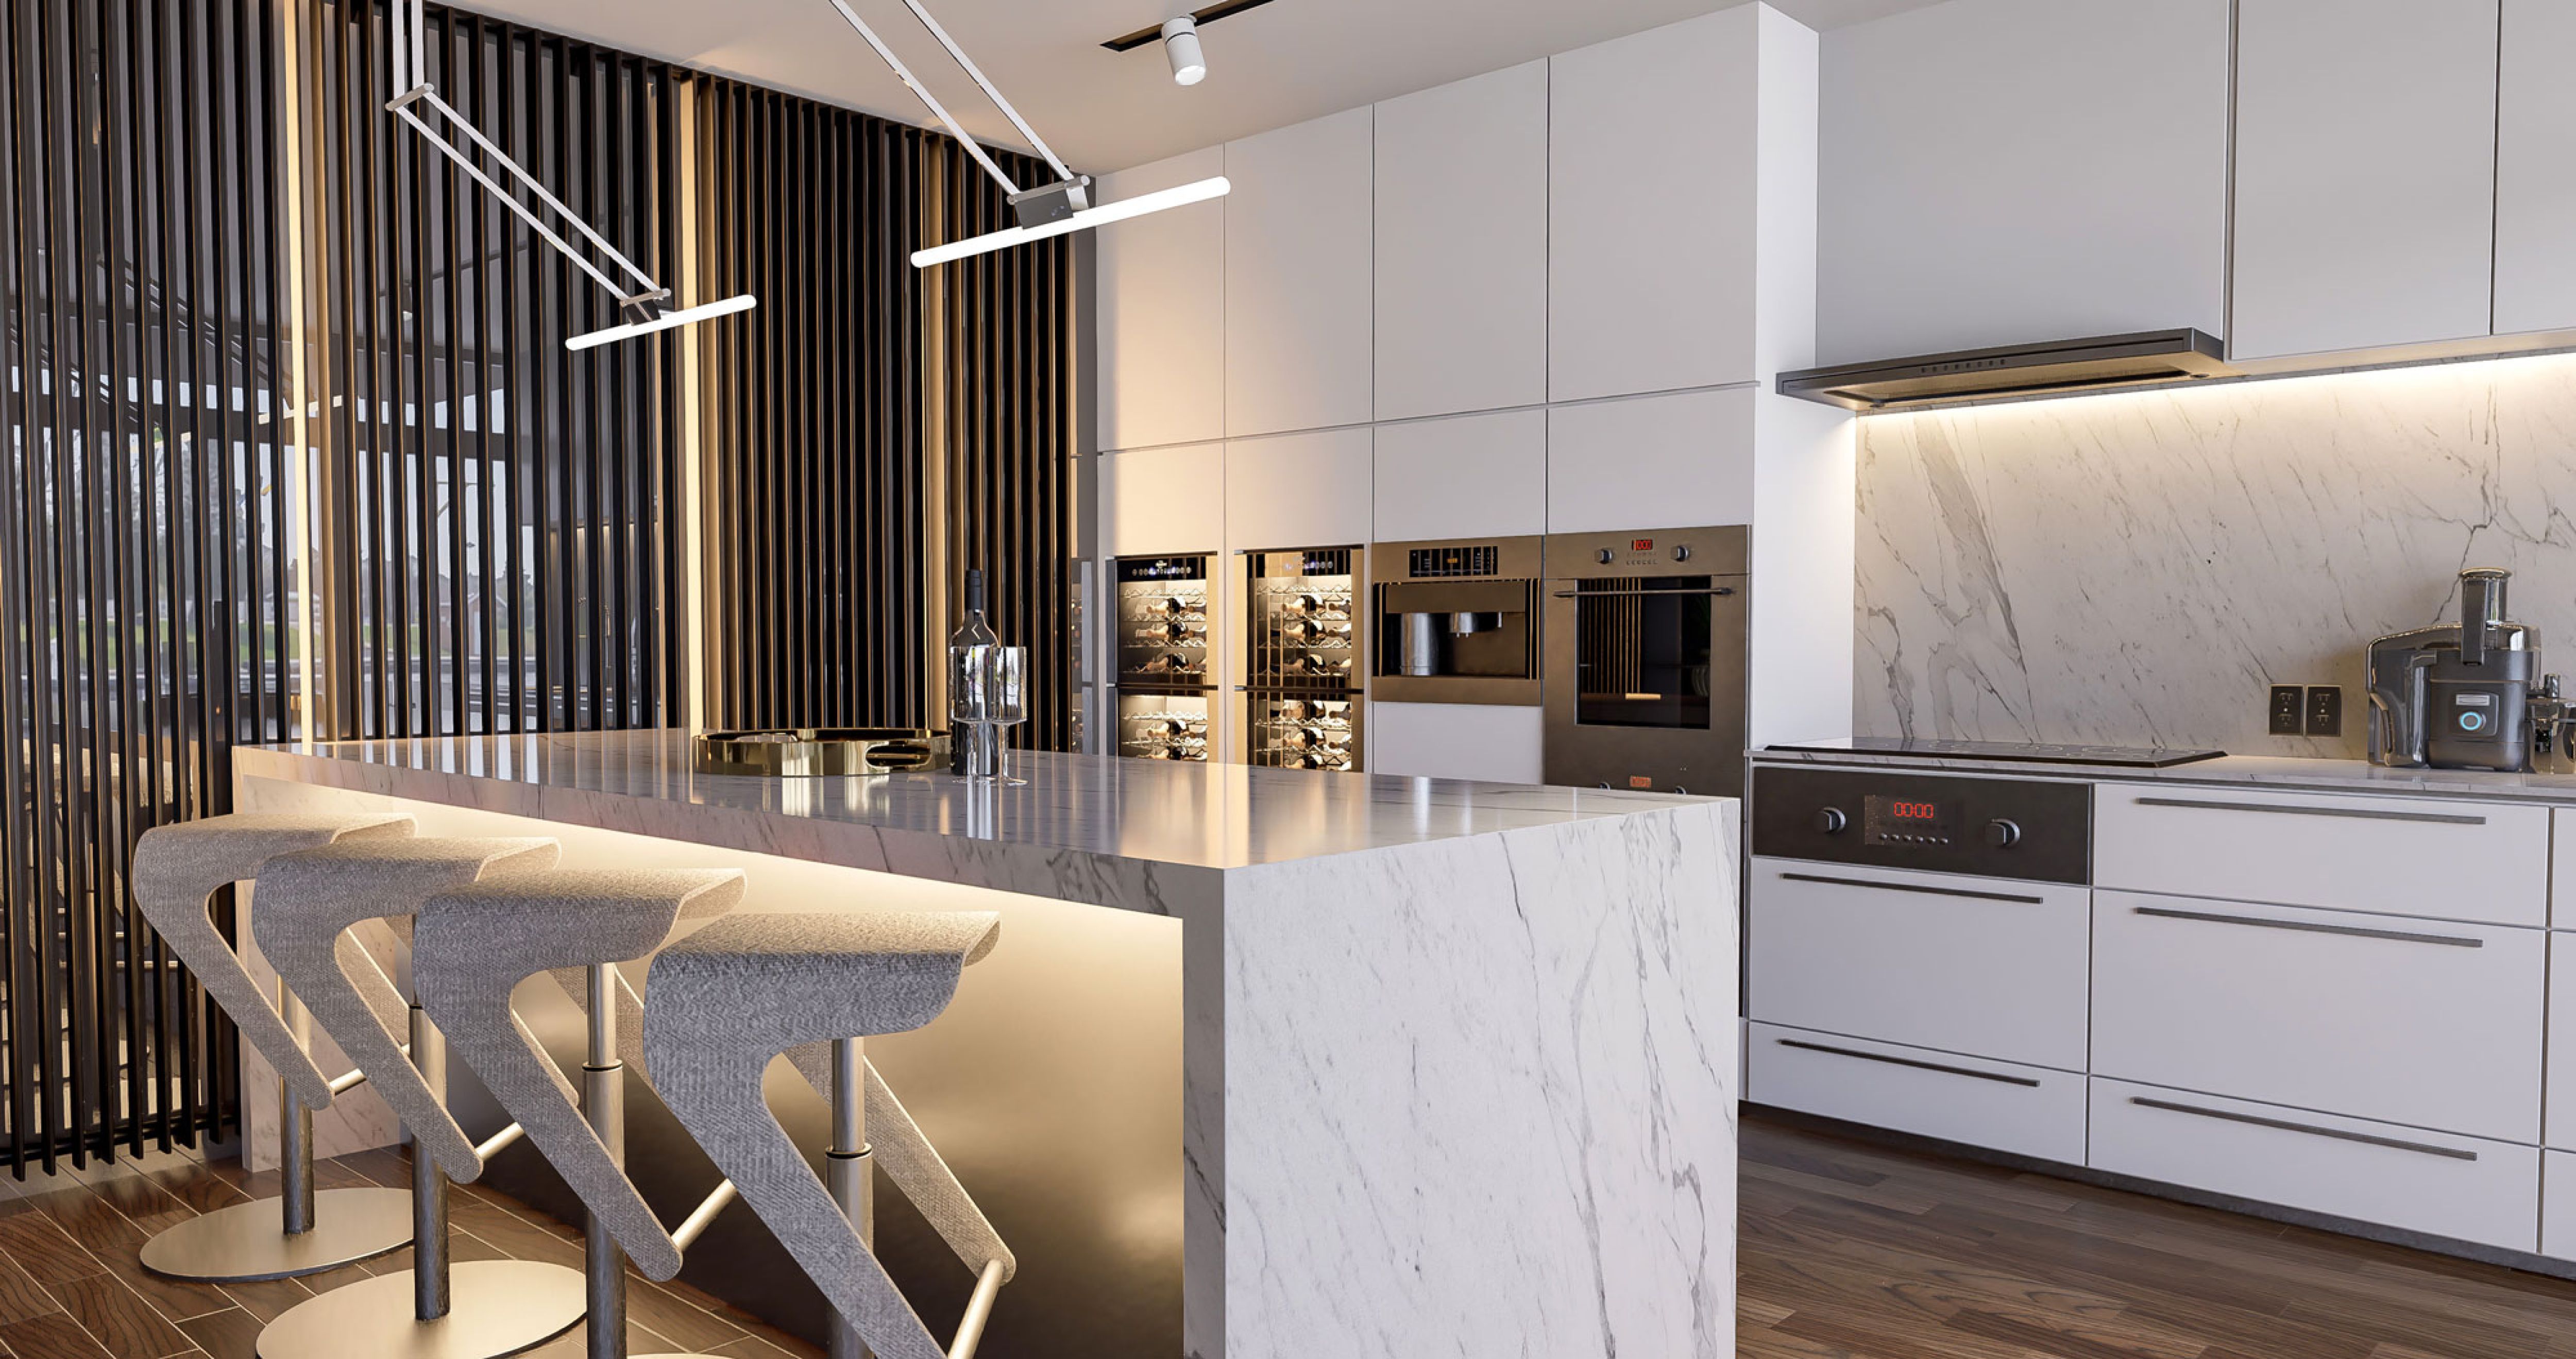 Rossini Cucine kitchens collection